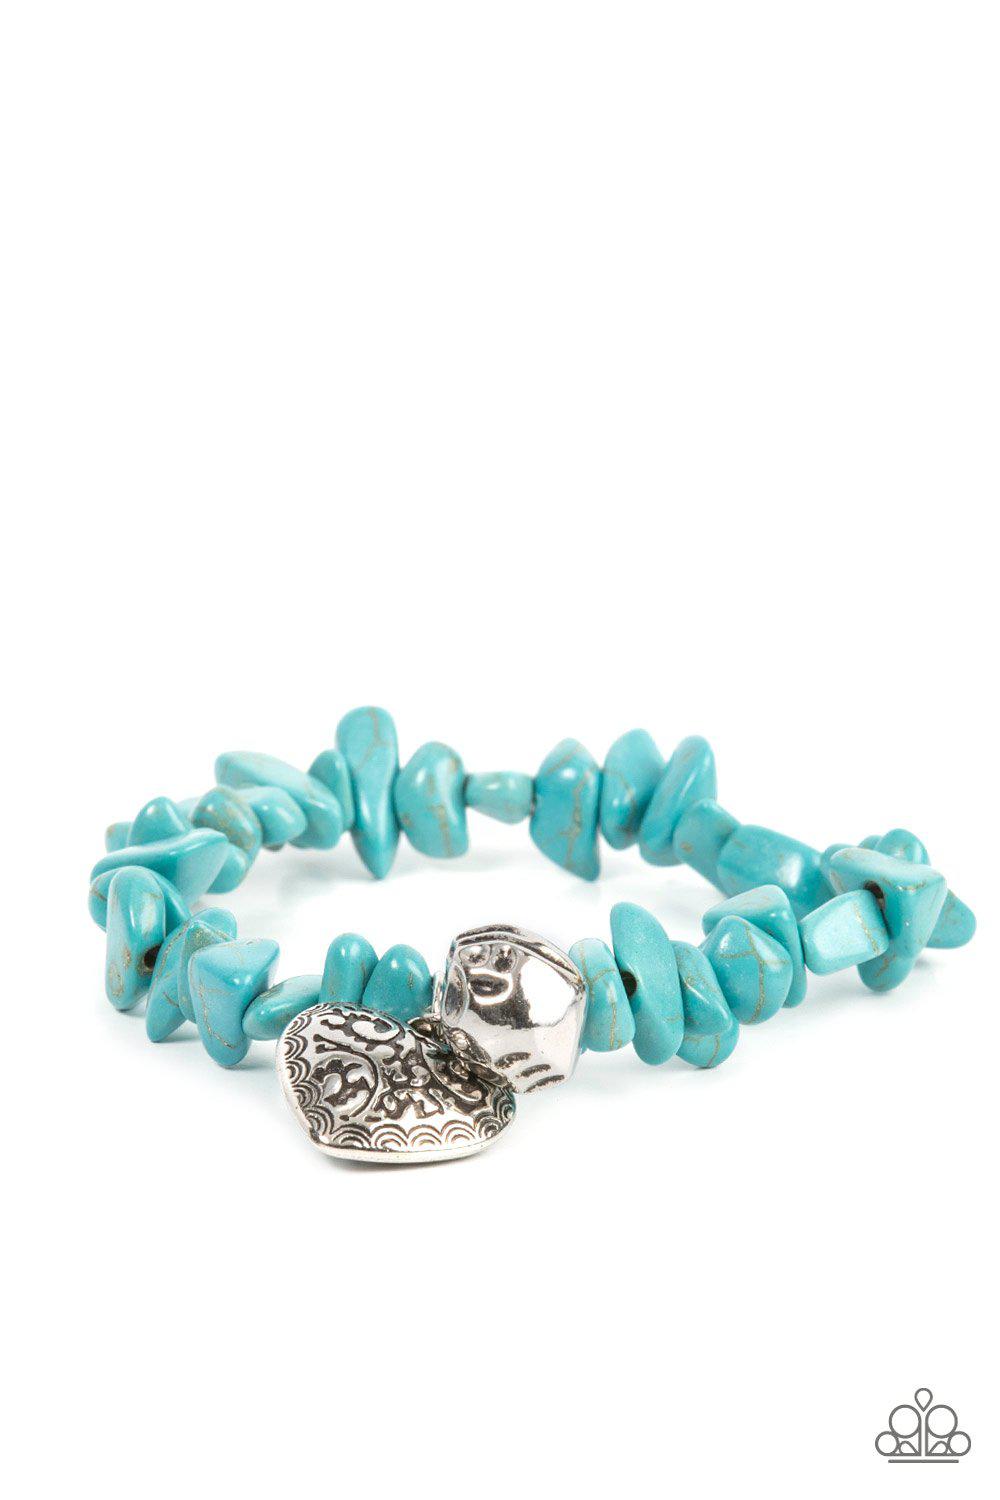 Love You to Pieces Turquoise Blue Stone and Silver Heart Bracelet - Paparazzi Accessories- lightbox - CarasShop.com - $5 Jewelry by Cara Jewels